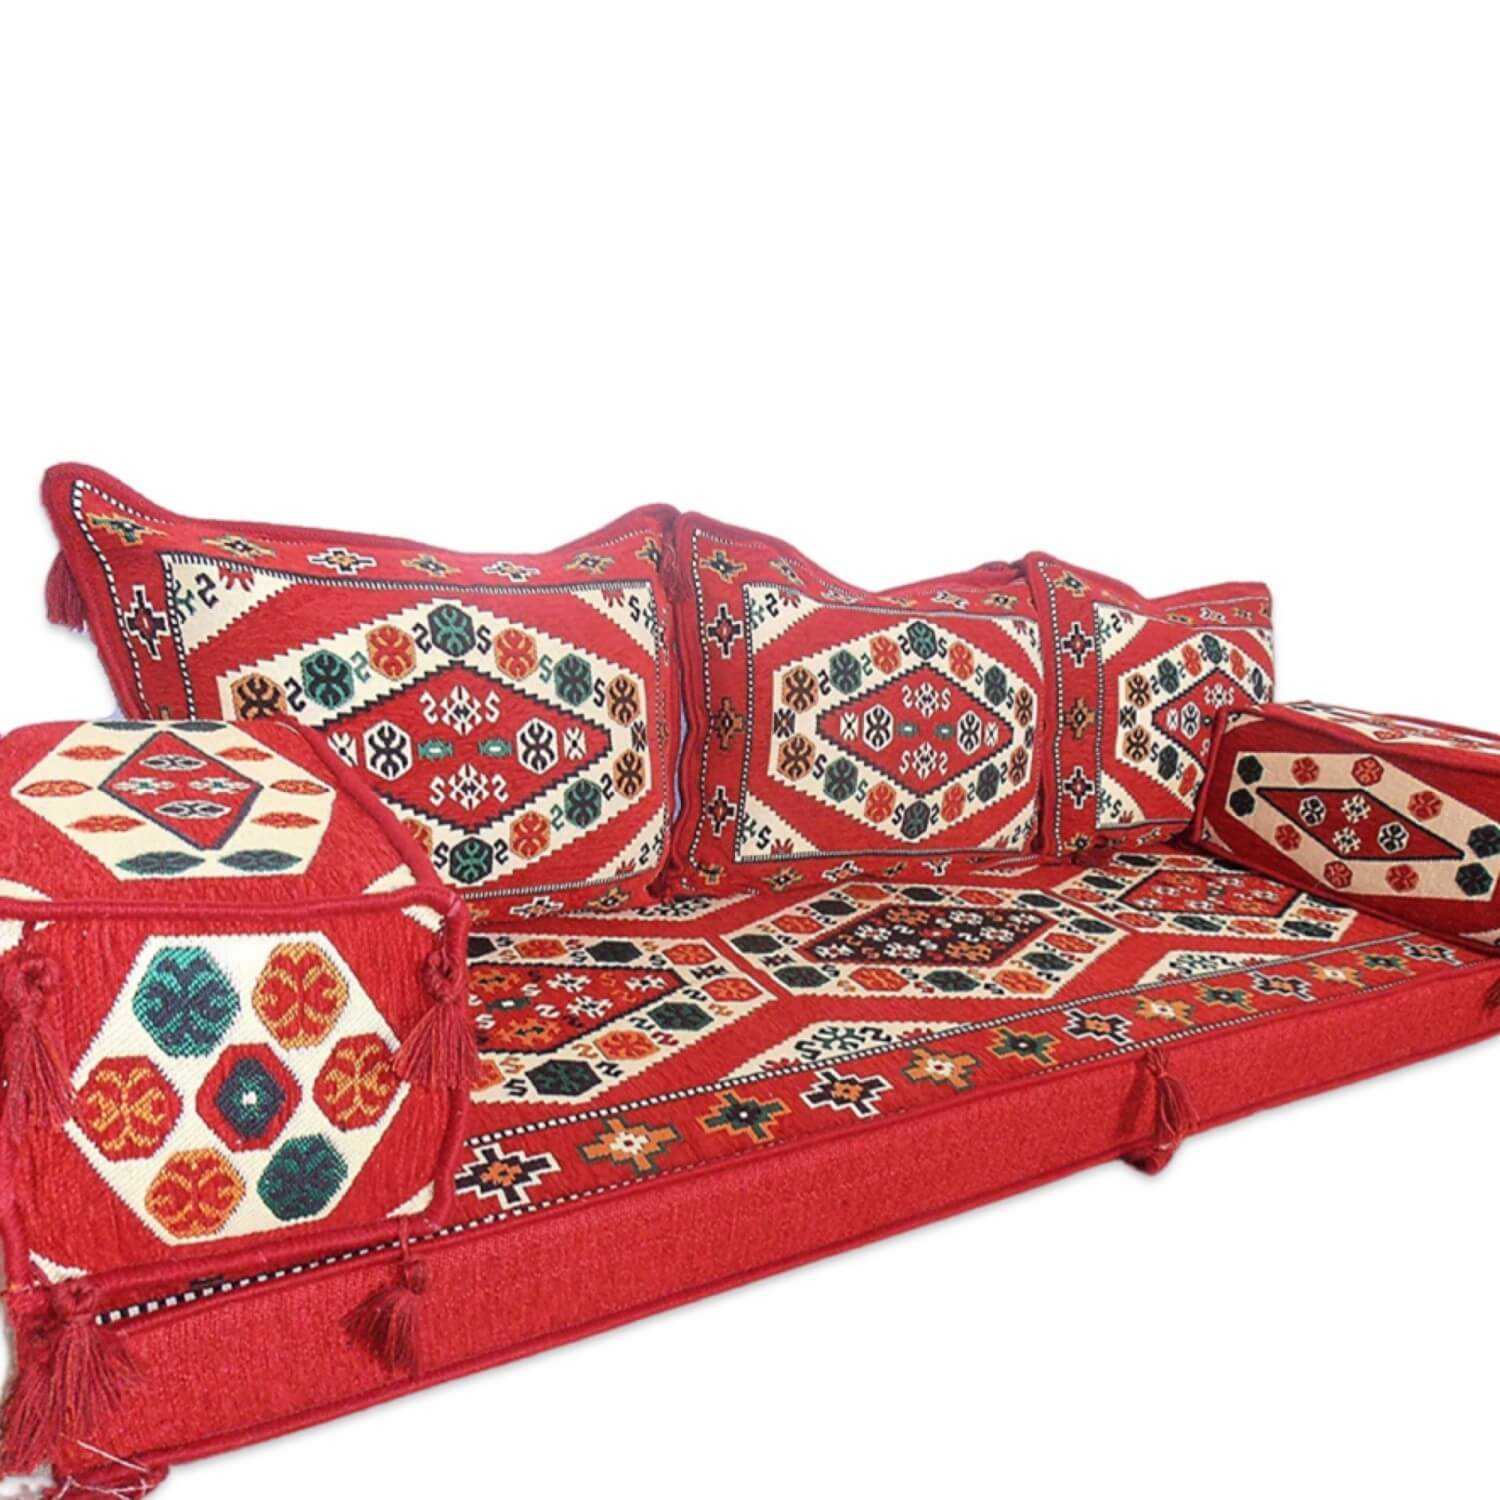 Nomad-1 Red Three Seater Majlis Floor Sofa Couch